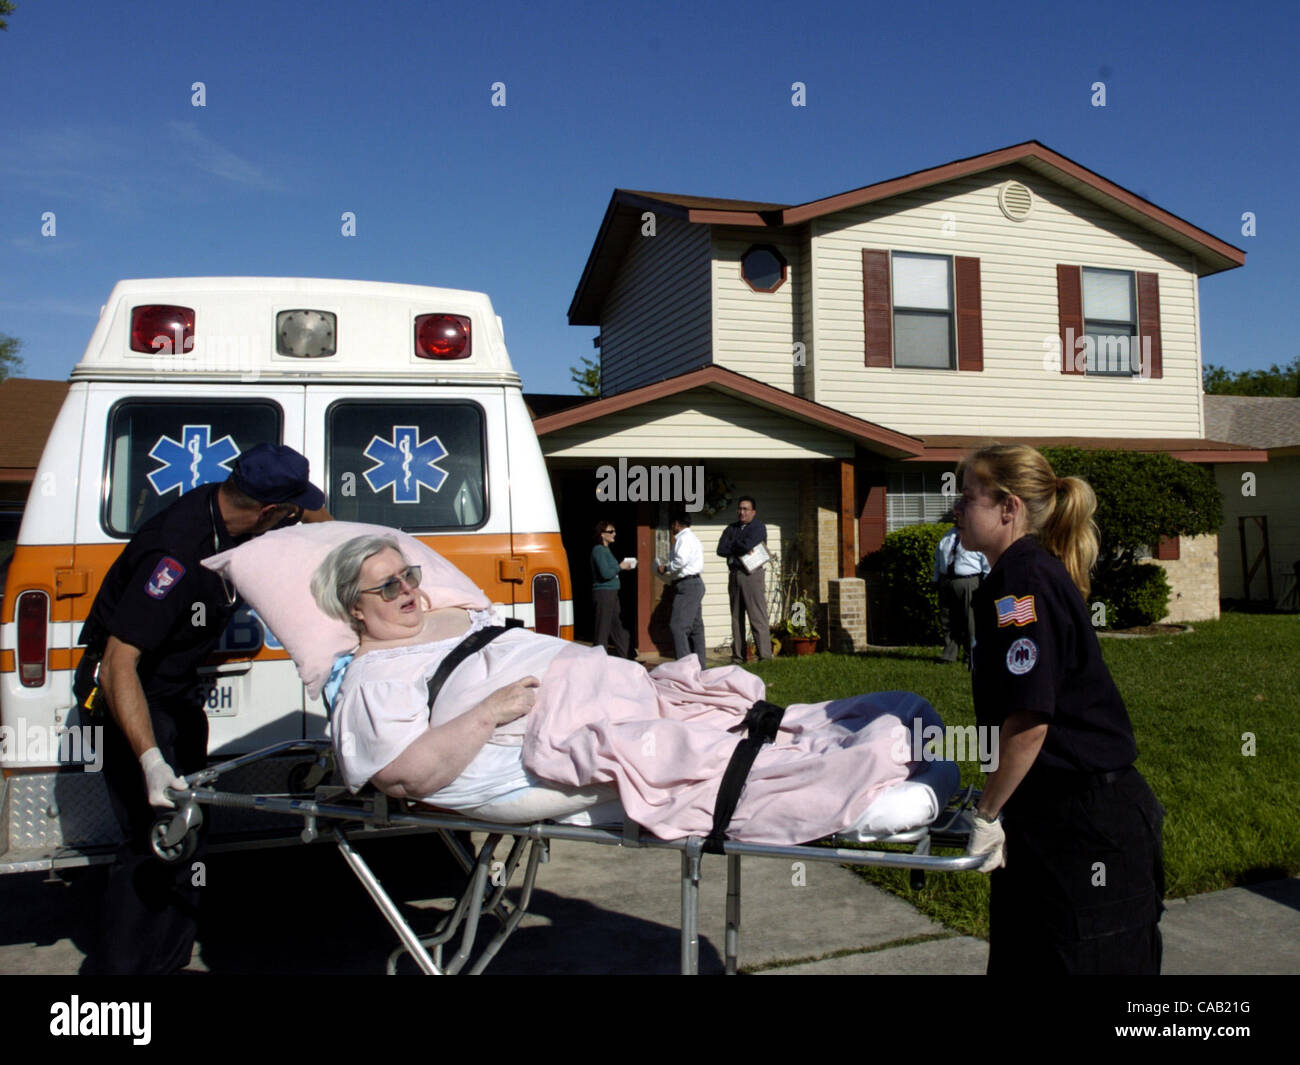 METRO - A resident is removed by private ambulance from an unliscensed elderly care center in the 2100 block of James Bonham Tuesday, March 30, 2004. The residents were moved to a licensed facility. BAHRAM MARK SOBHANI/STAFF Stock Photo